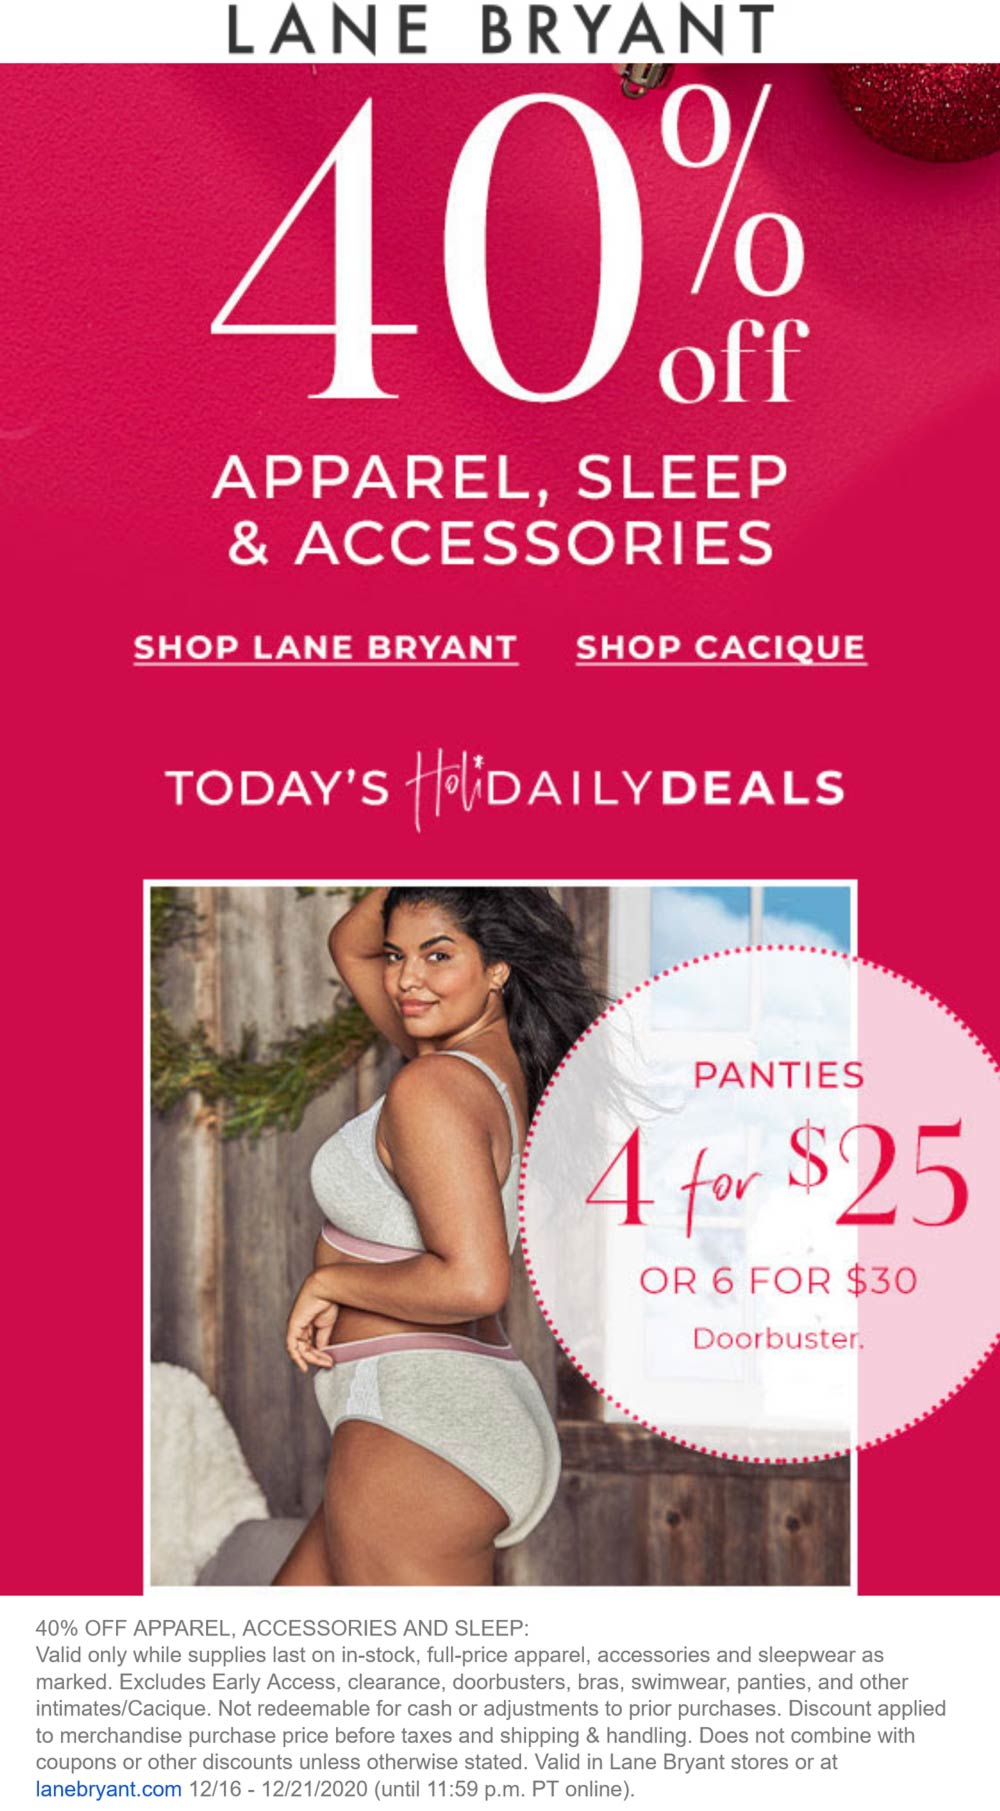 Lane Bryant stores Coupon  40% off apparel sleep & accessories at Lane Bryant, ditto online #lanebryant 